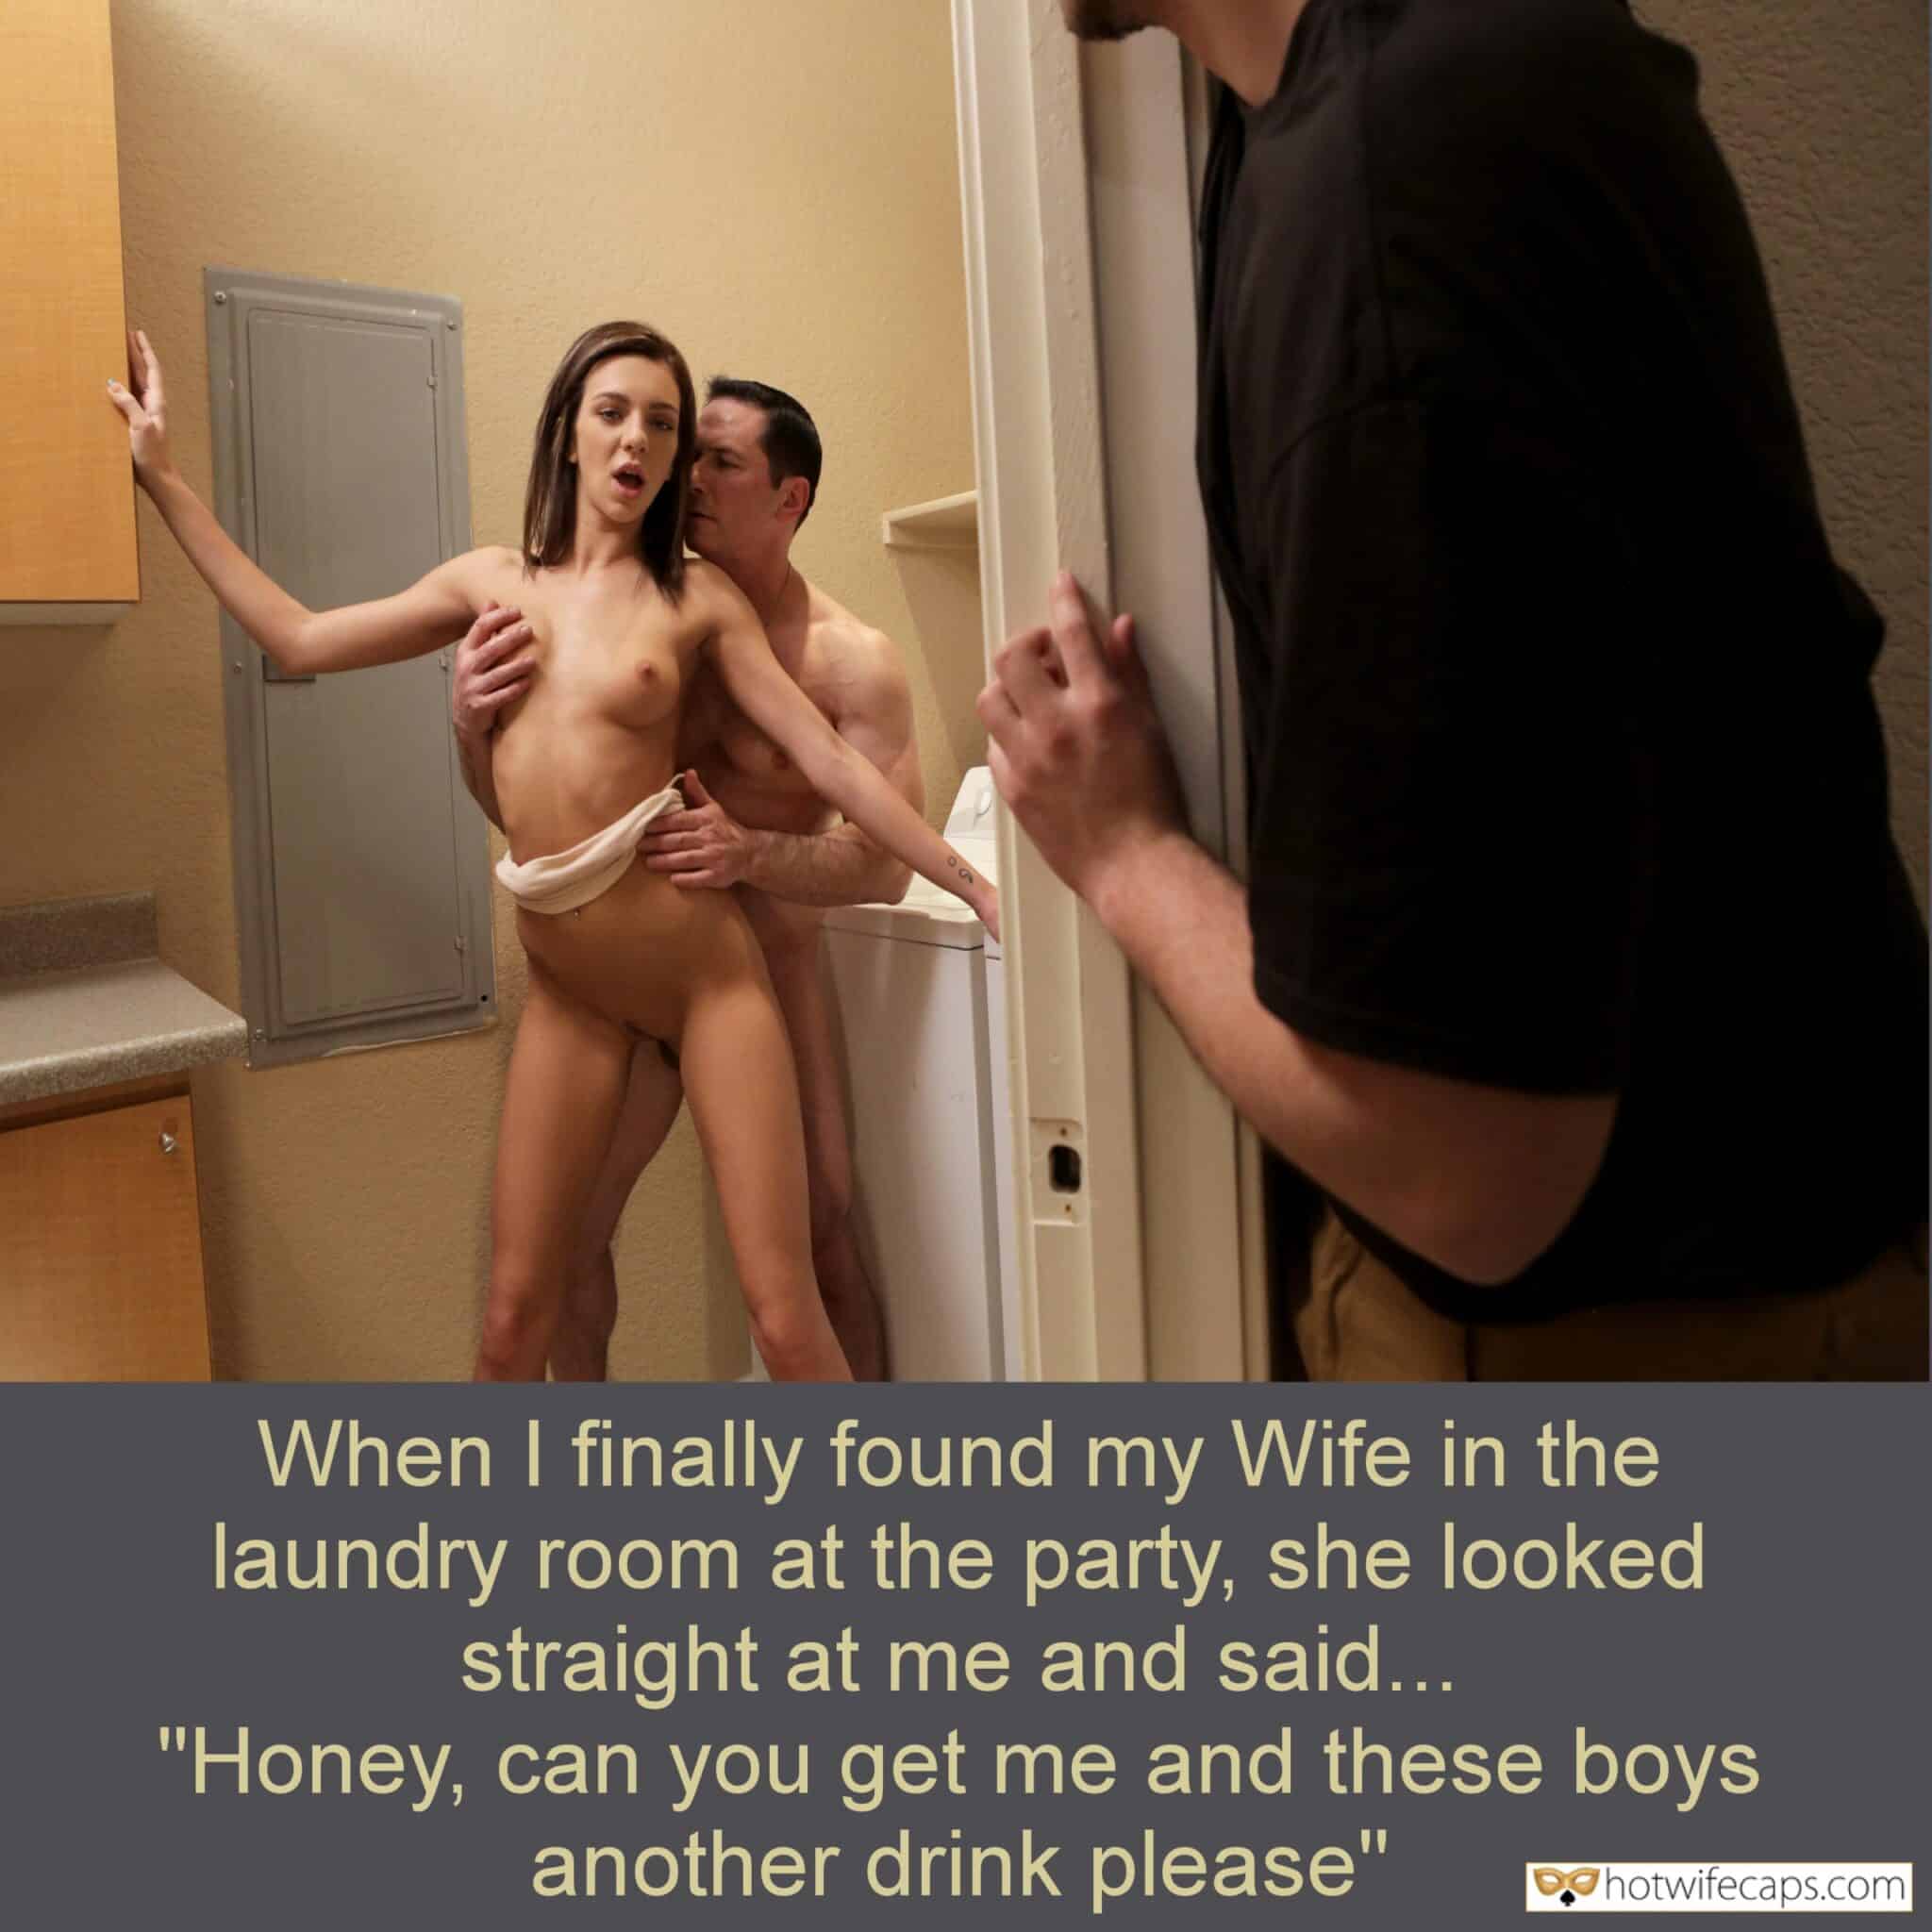 Cheating, Femdom, Humiliation, Public Hotwife Caption №14254 when i caught her fucking bitch refused to stop photo